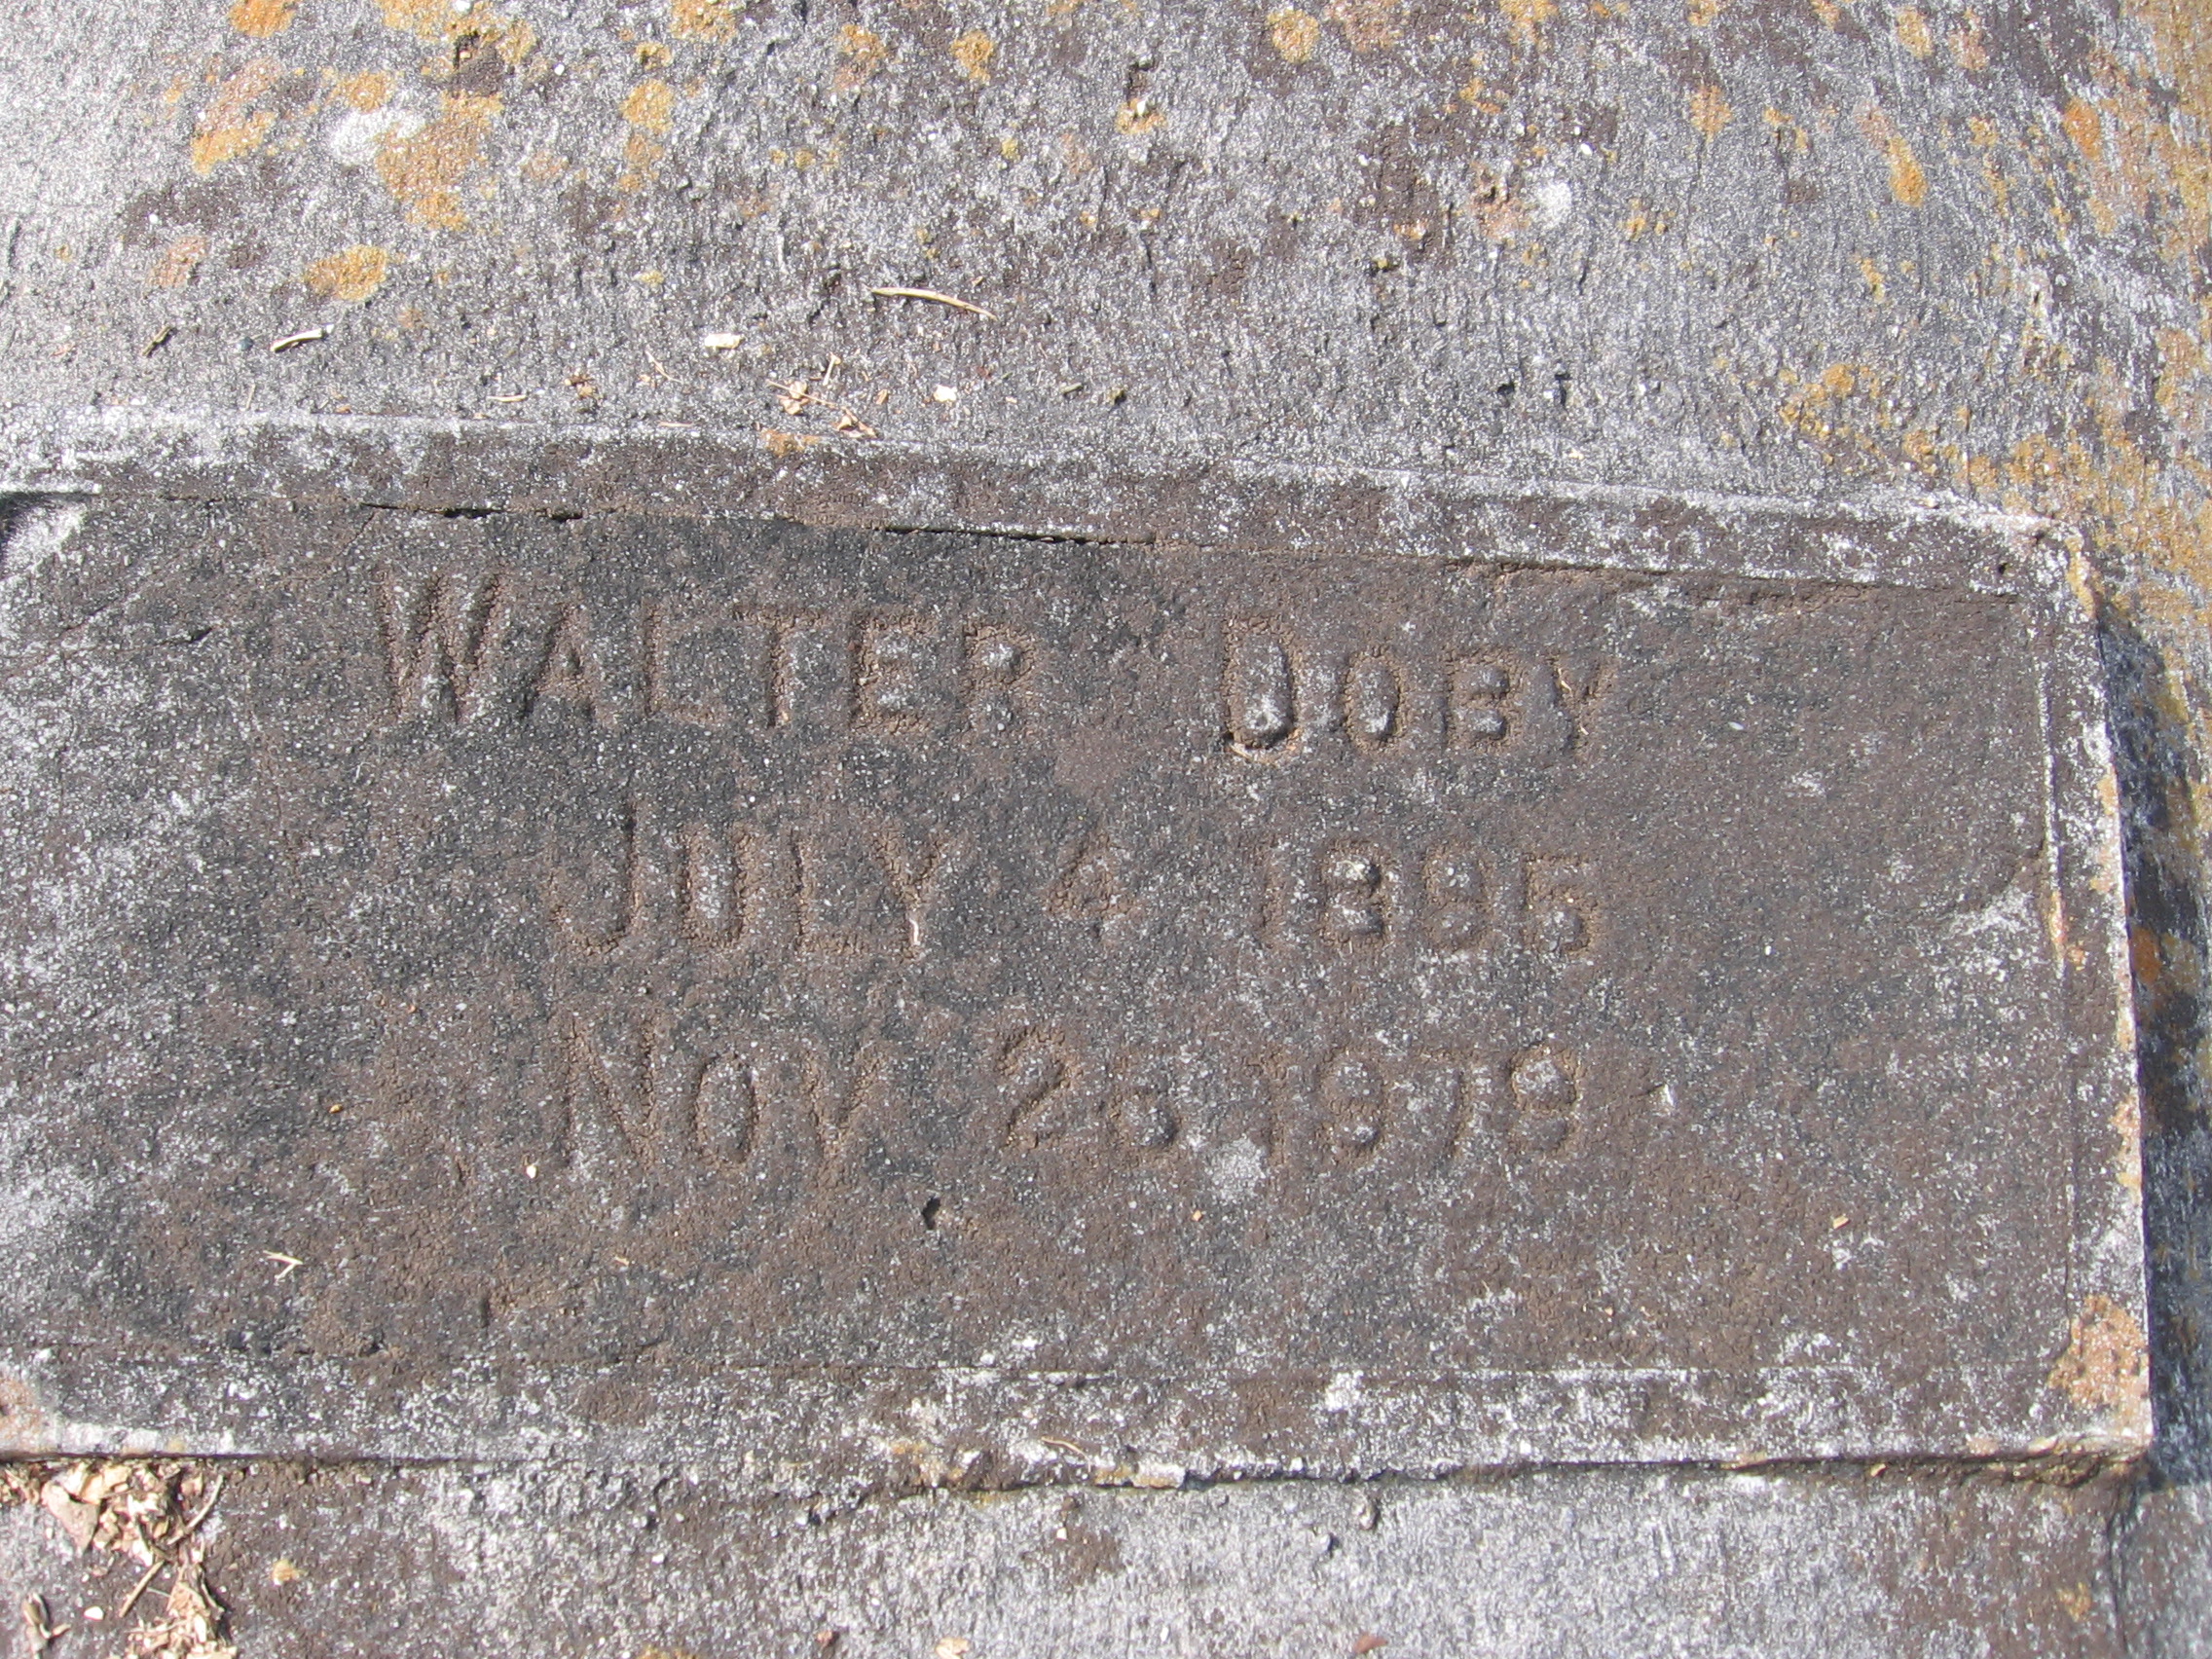 Walter Doby